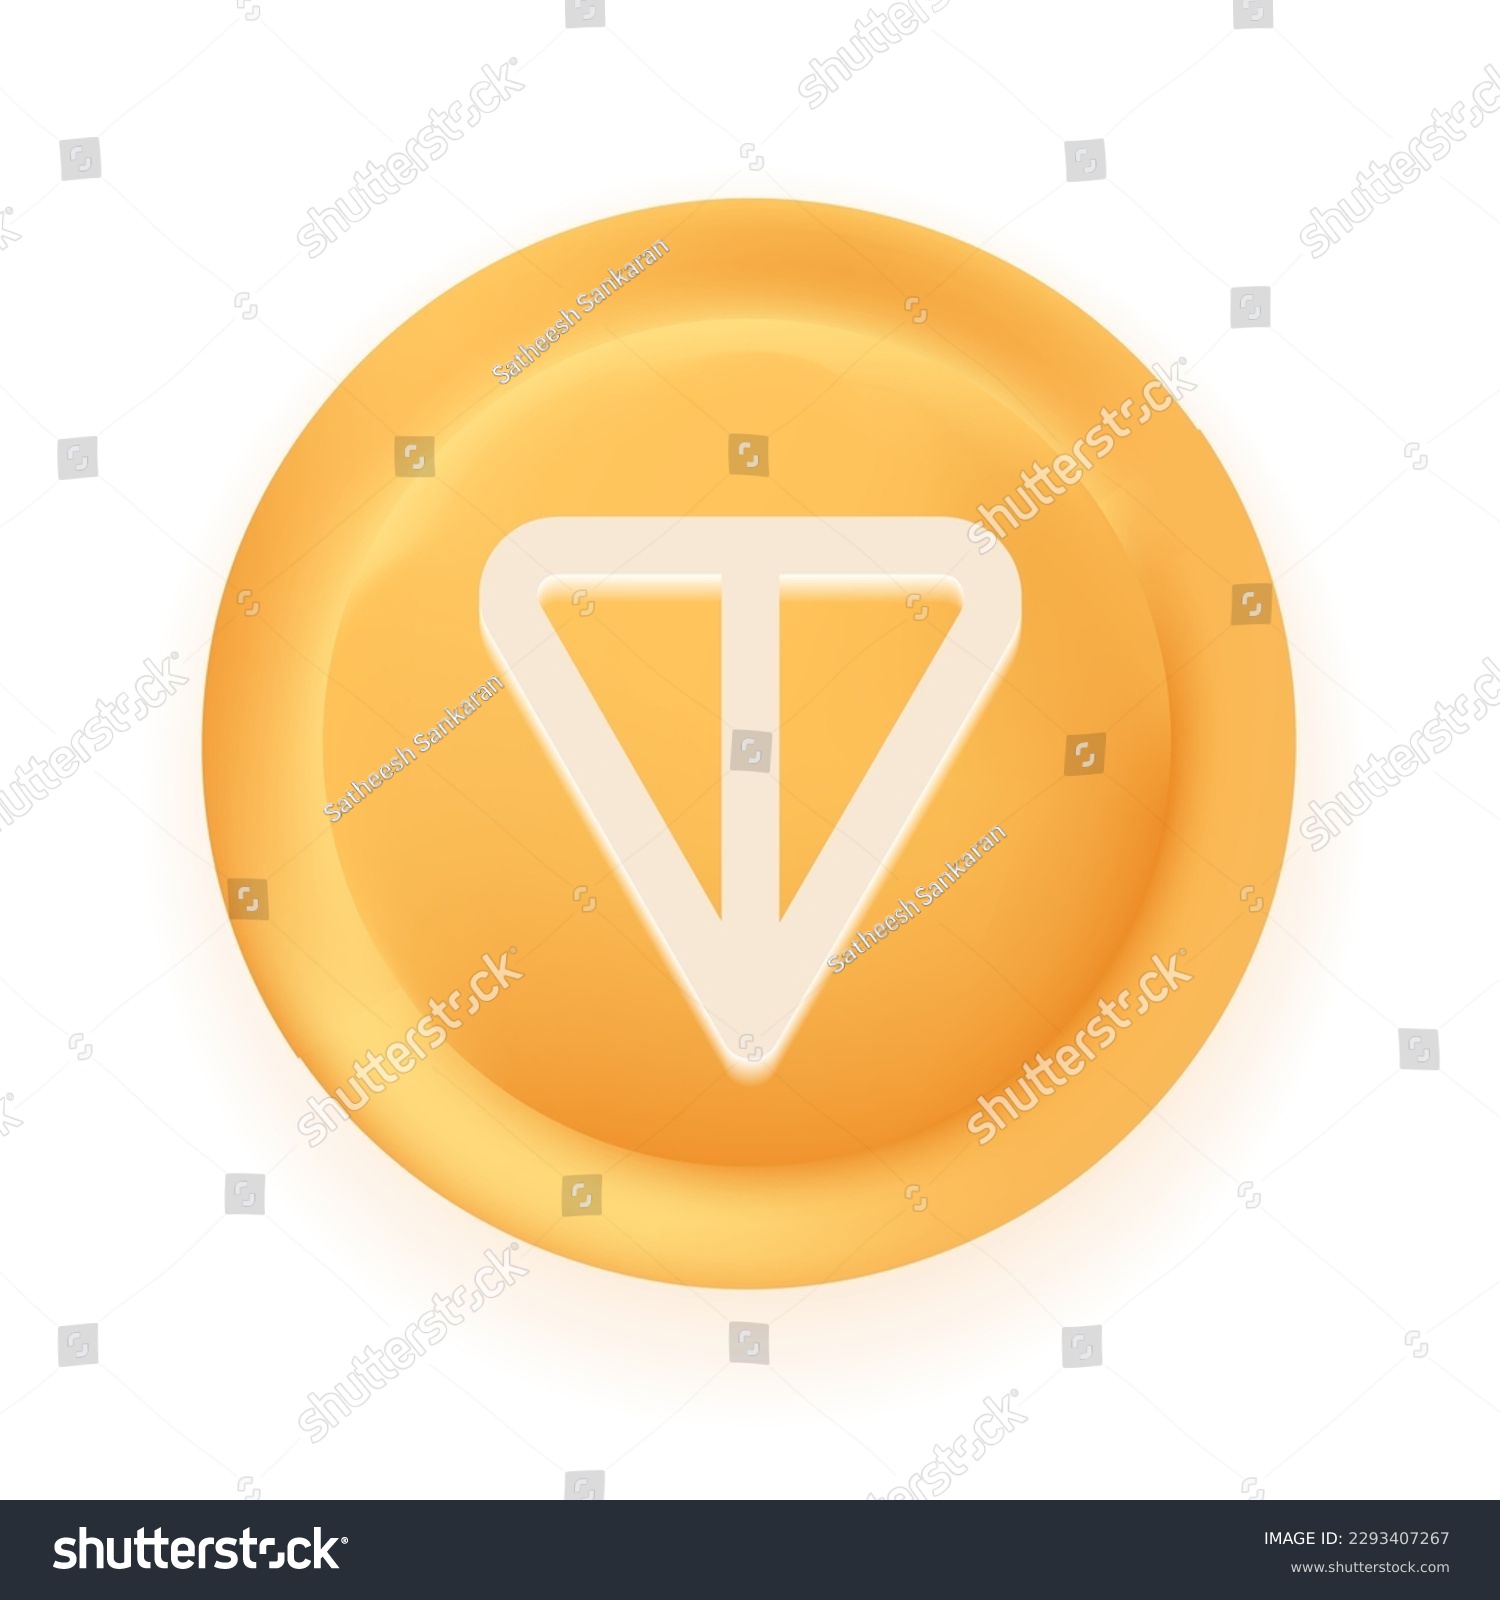 SVG of Toncoin  (TON) crypto currency 3D coin vector illustration isolated on white background. Can be used as virtual money icon, logo, emblem, sticker and badge designs. svg